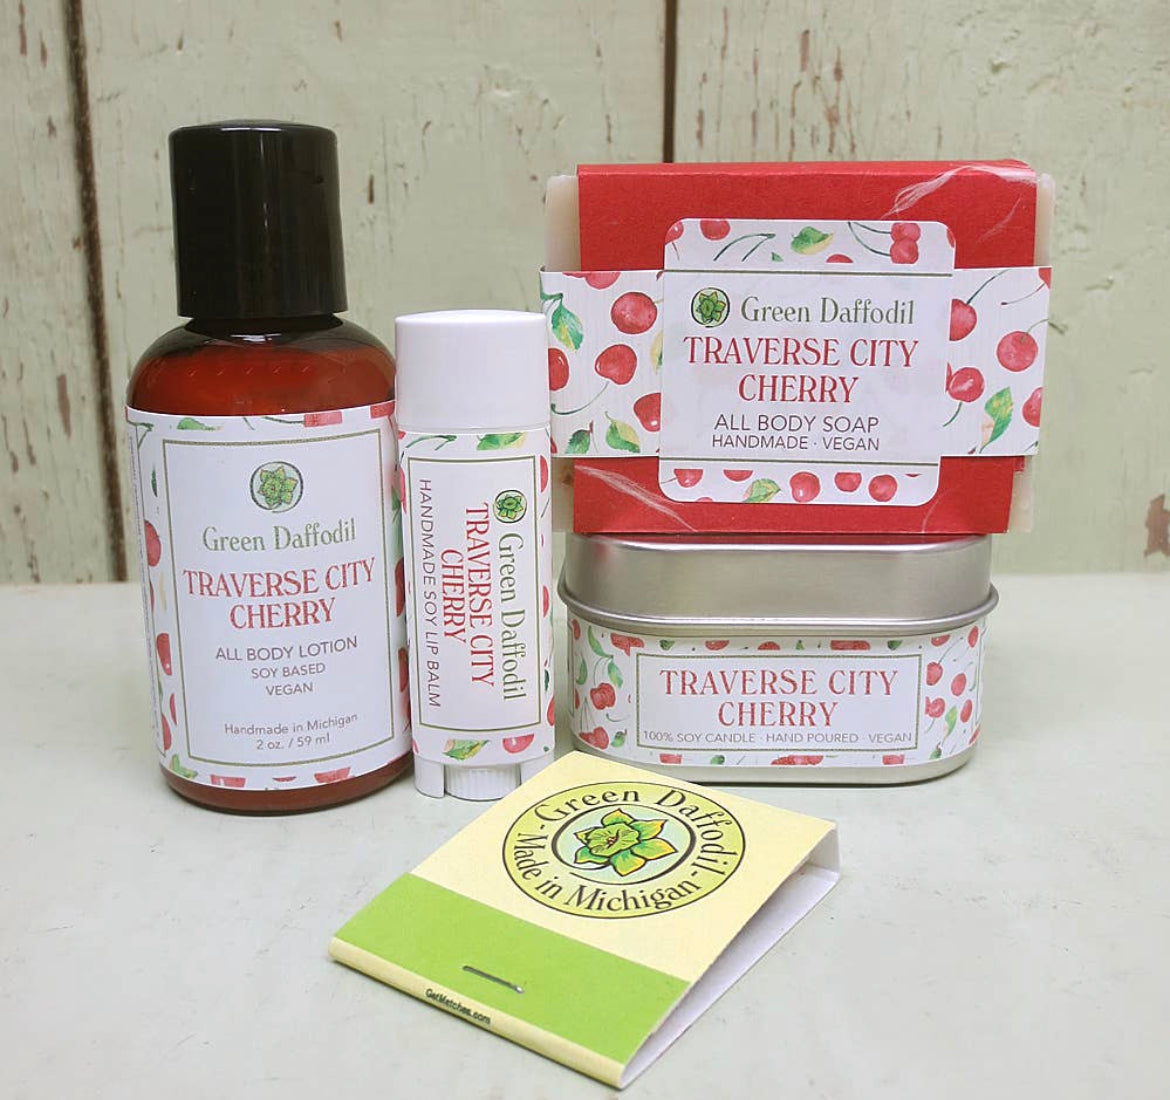 Large scented gift set